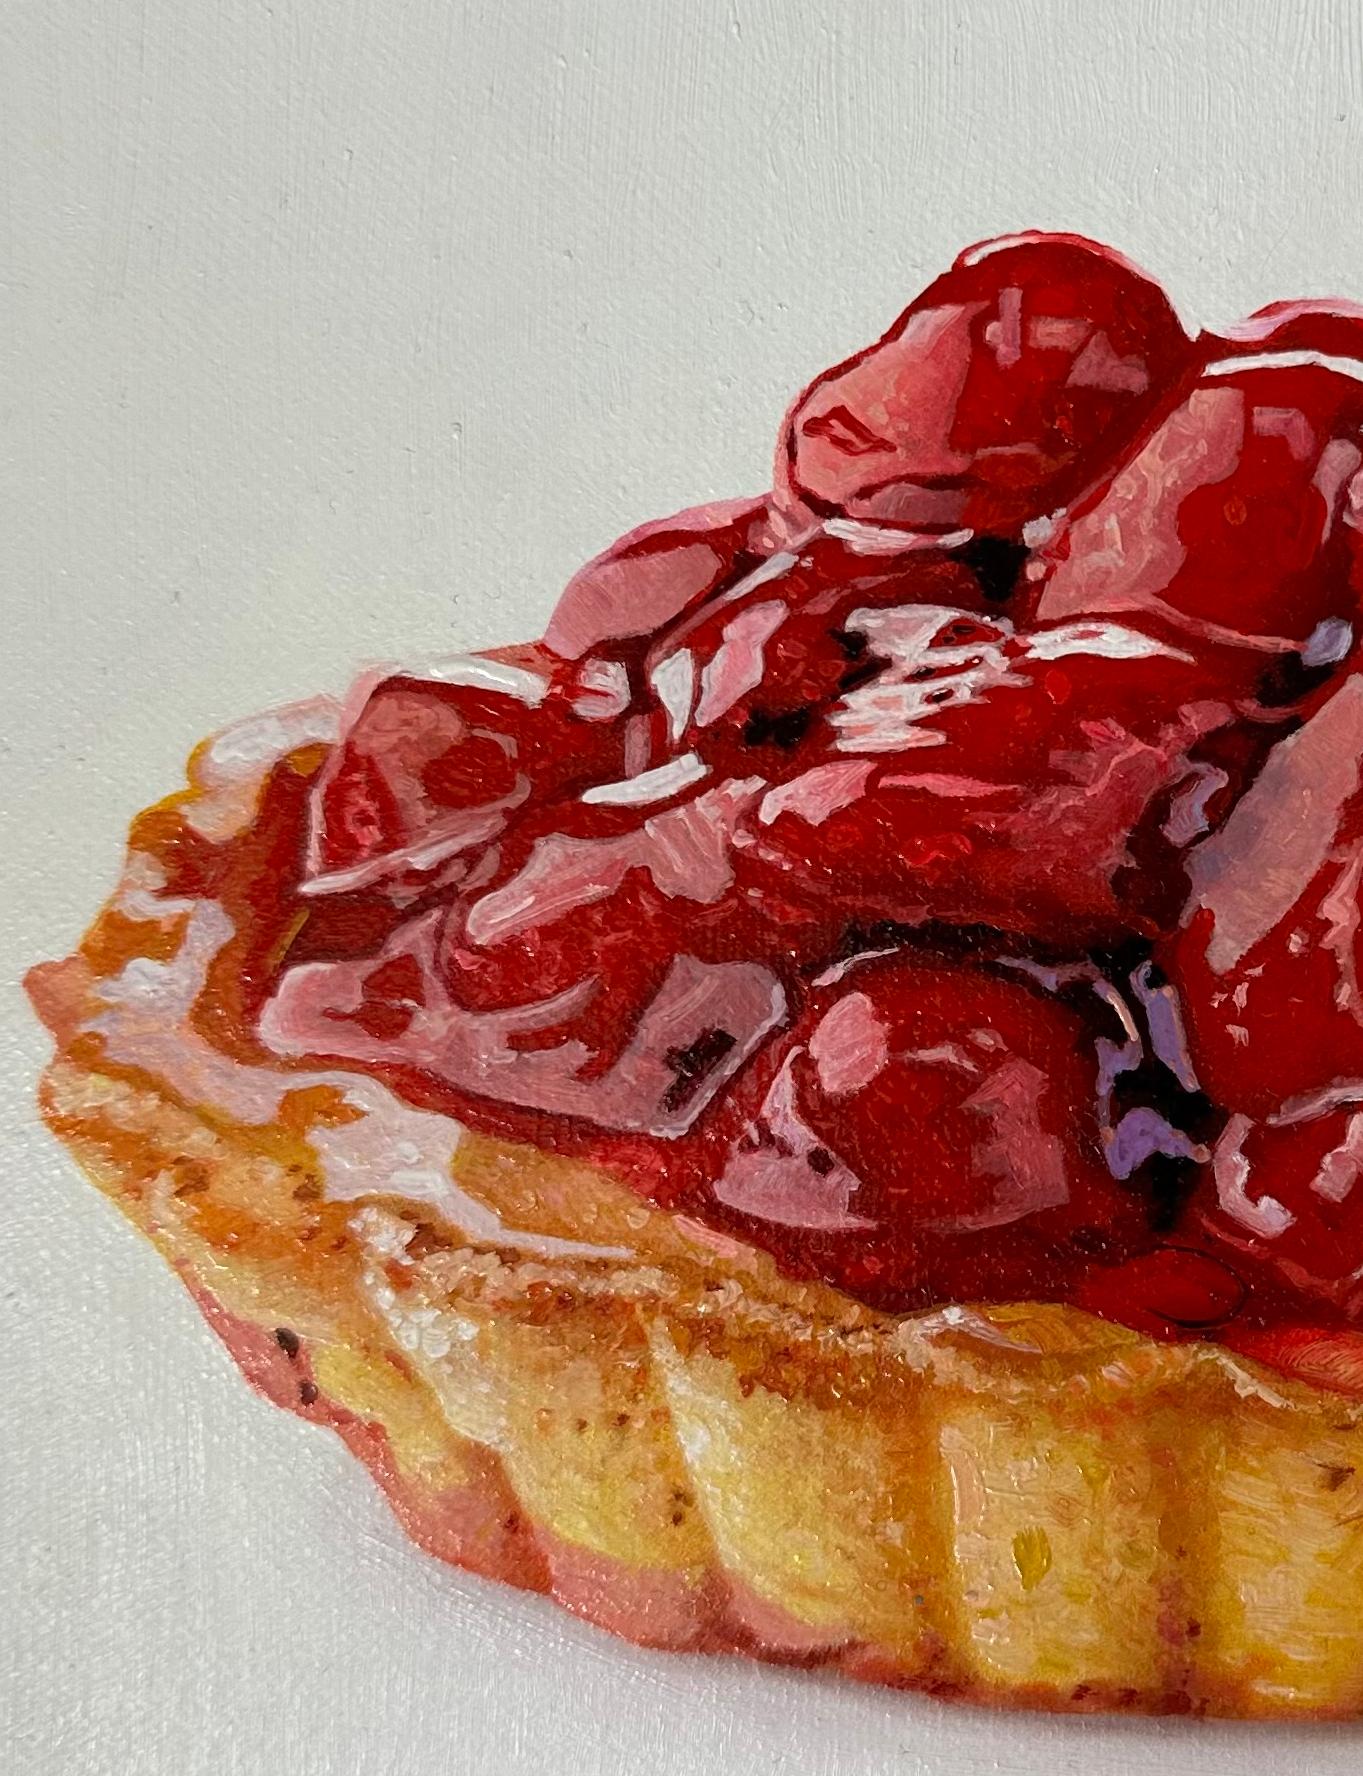 Strawberry and Cherry Tart with Hair - Photorealist Painting by Marc Dennis